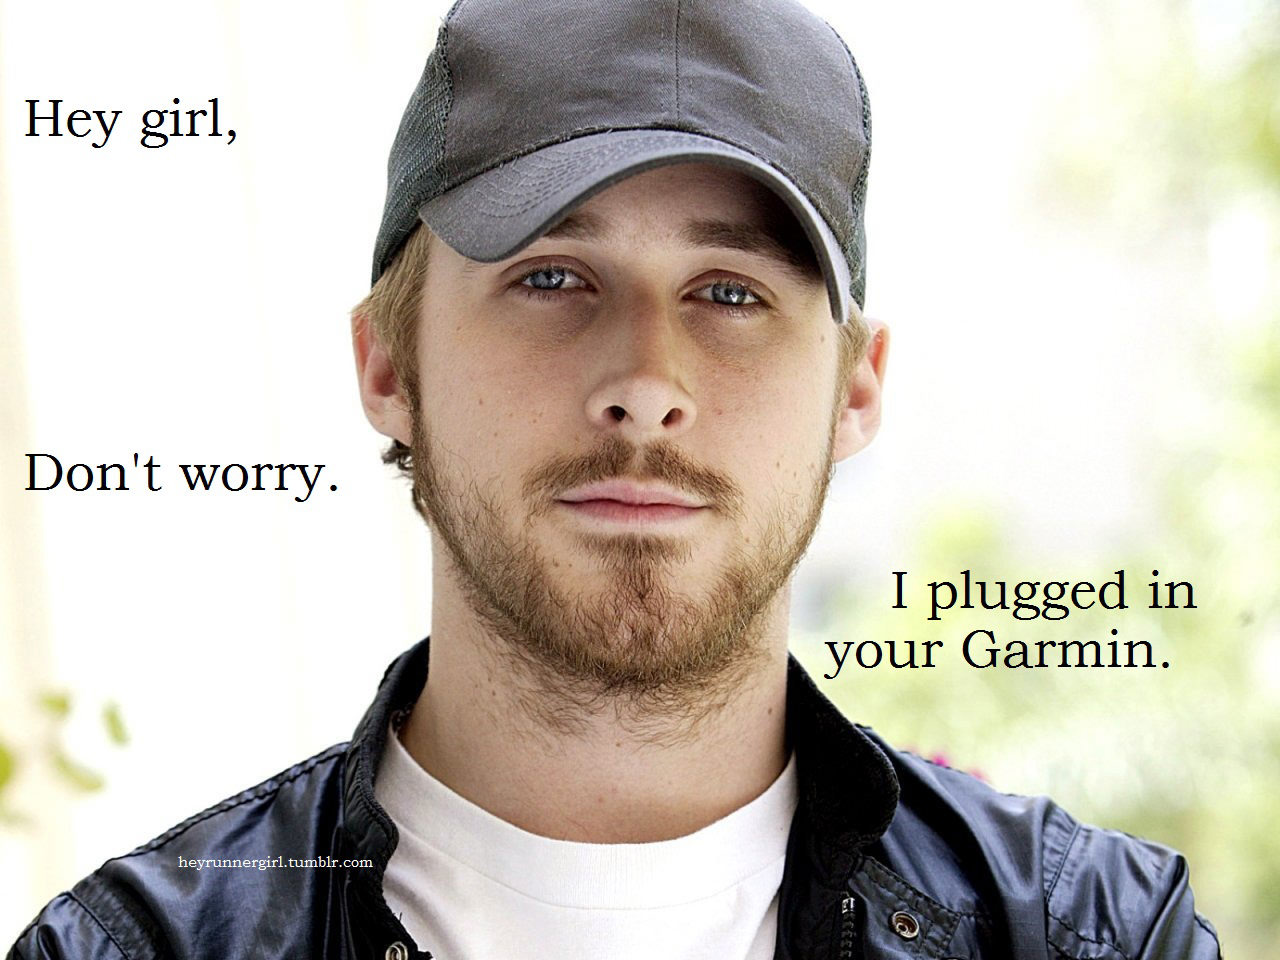 Runner Things #732: Hey girl, don't worry. I plugged in your Garmin.